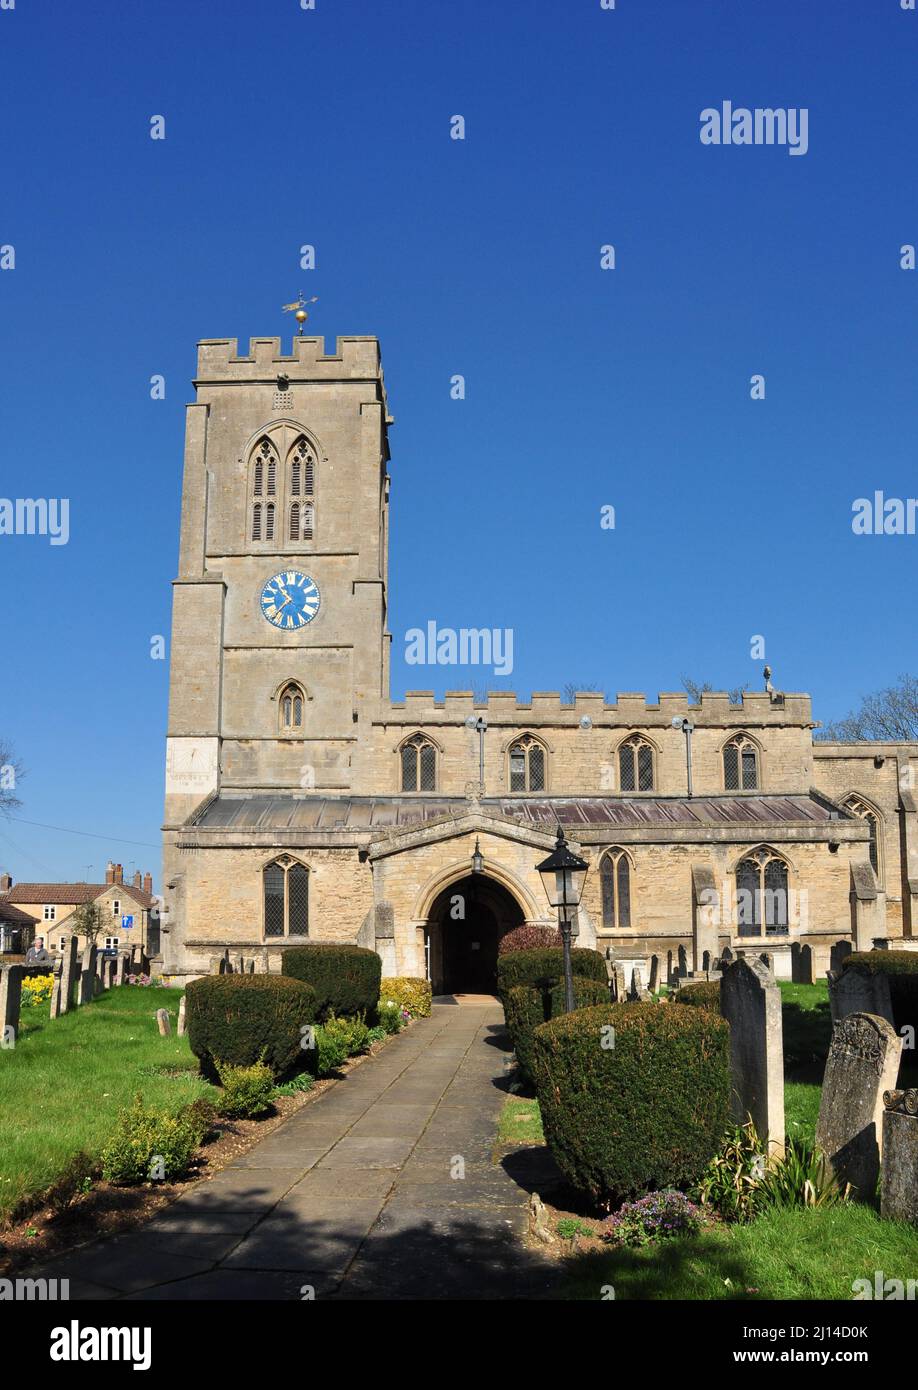 St Guthlac's Church in Church Street, Market Deeping, Lincolnshire, England, UK Stock Photo